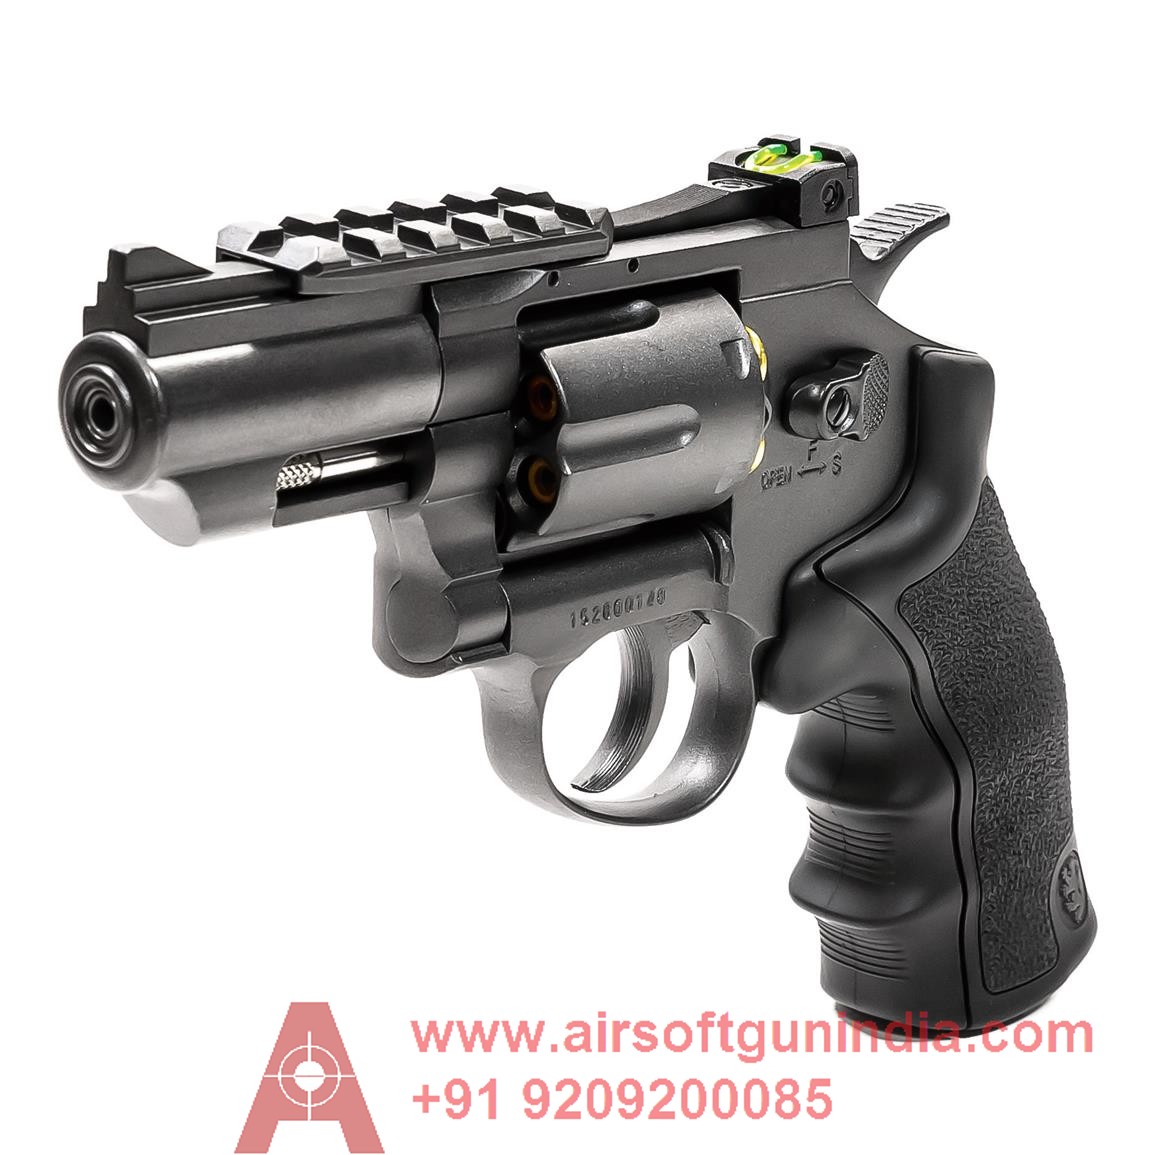 Black Ops Metal Co2 Bb Revolver By Airsoft Gun India